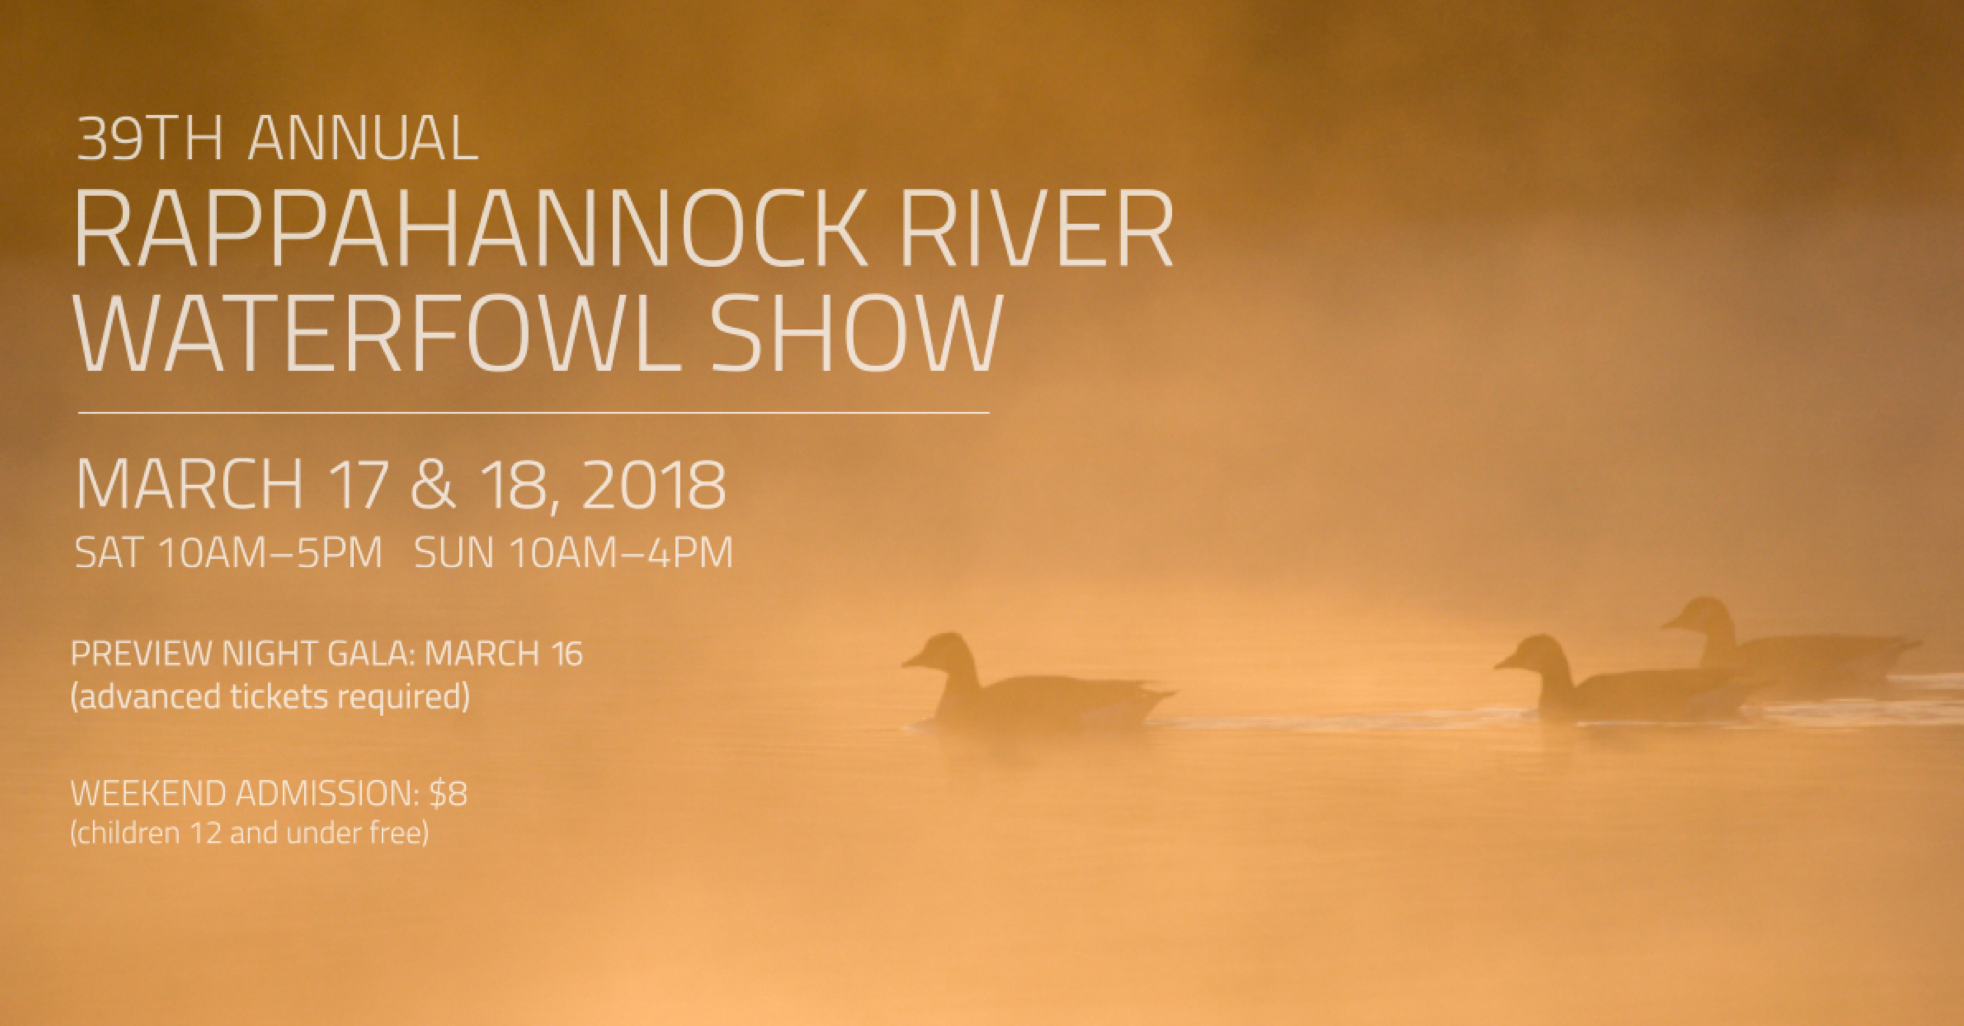 Guy will be exhibiting at the Rappahannock River Waterfowl Show, March 17 - 18.